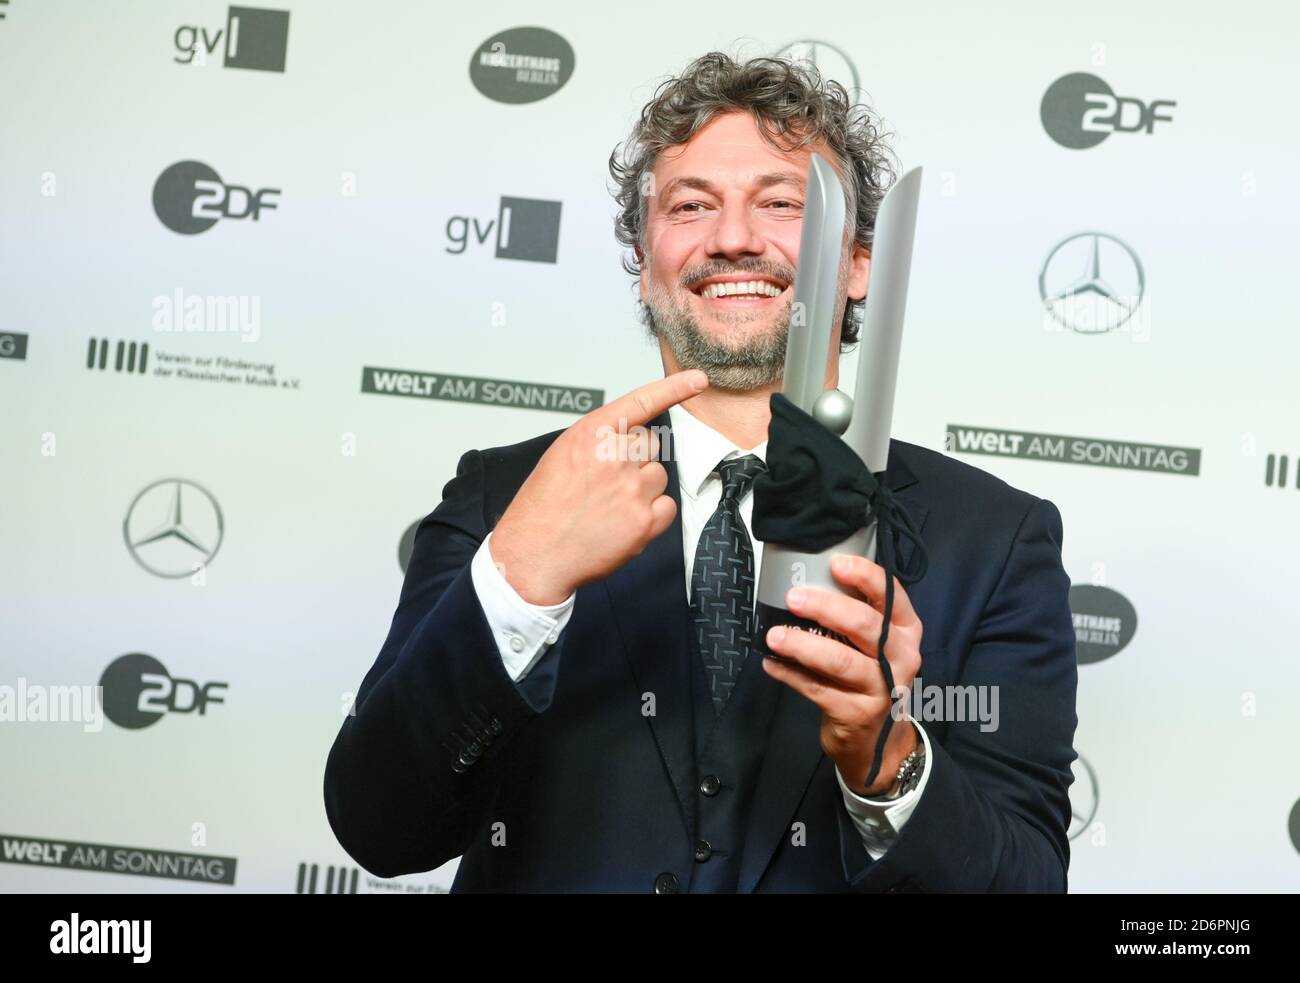 Berlin, Germany. 18th Oct, 2020. The opera singer Jonas Kaufmann will present his prize at the Opus Klassik 2020 music award ceremony at the Konzerthaus am Gendarmenmarkt. He received the prize for his album 'Vienna' in the category 'Classical without Borders' and has tied his mouth and nose protection around it. Since 2018, music companies, record labels and concert organizers have been awarding the prize to 47 winners in 25 categories. Credit: Jens Kalaene/dpa-Zentralbild/dpa/Alamy Live News Stock Photo